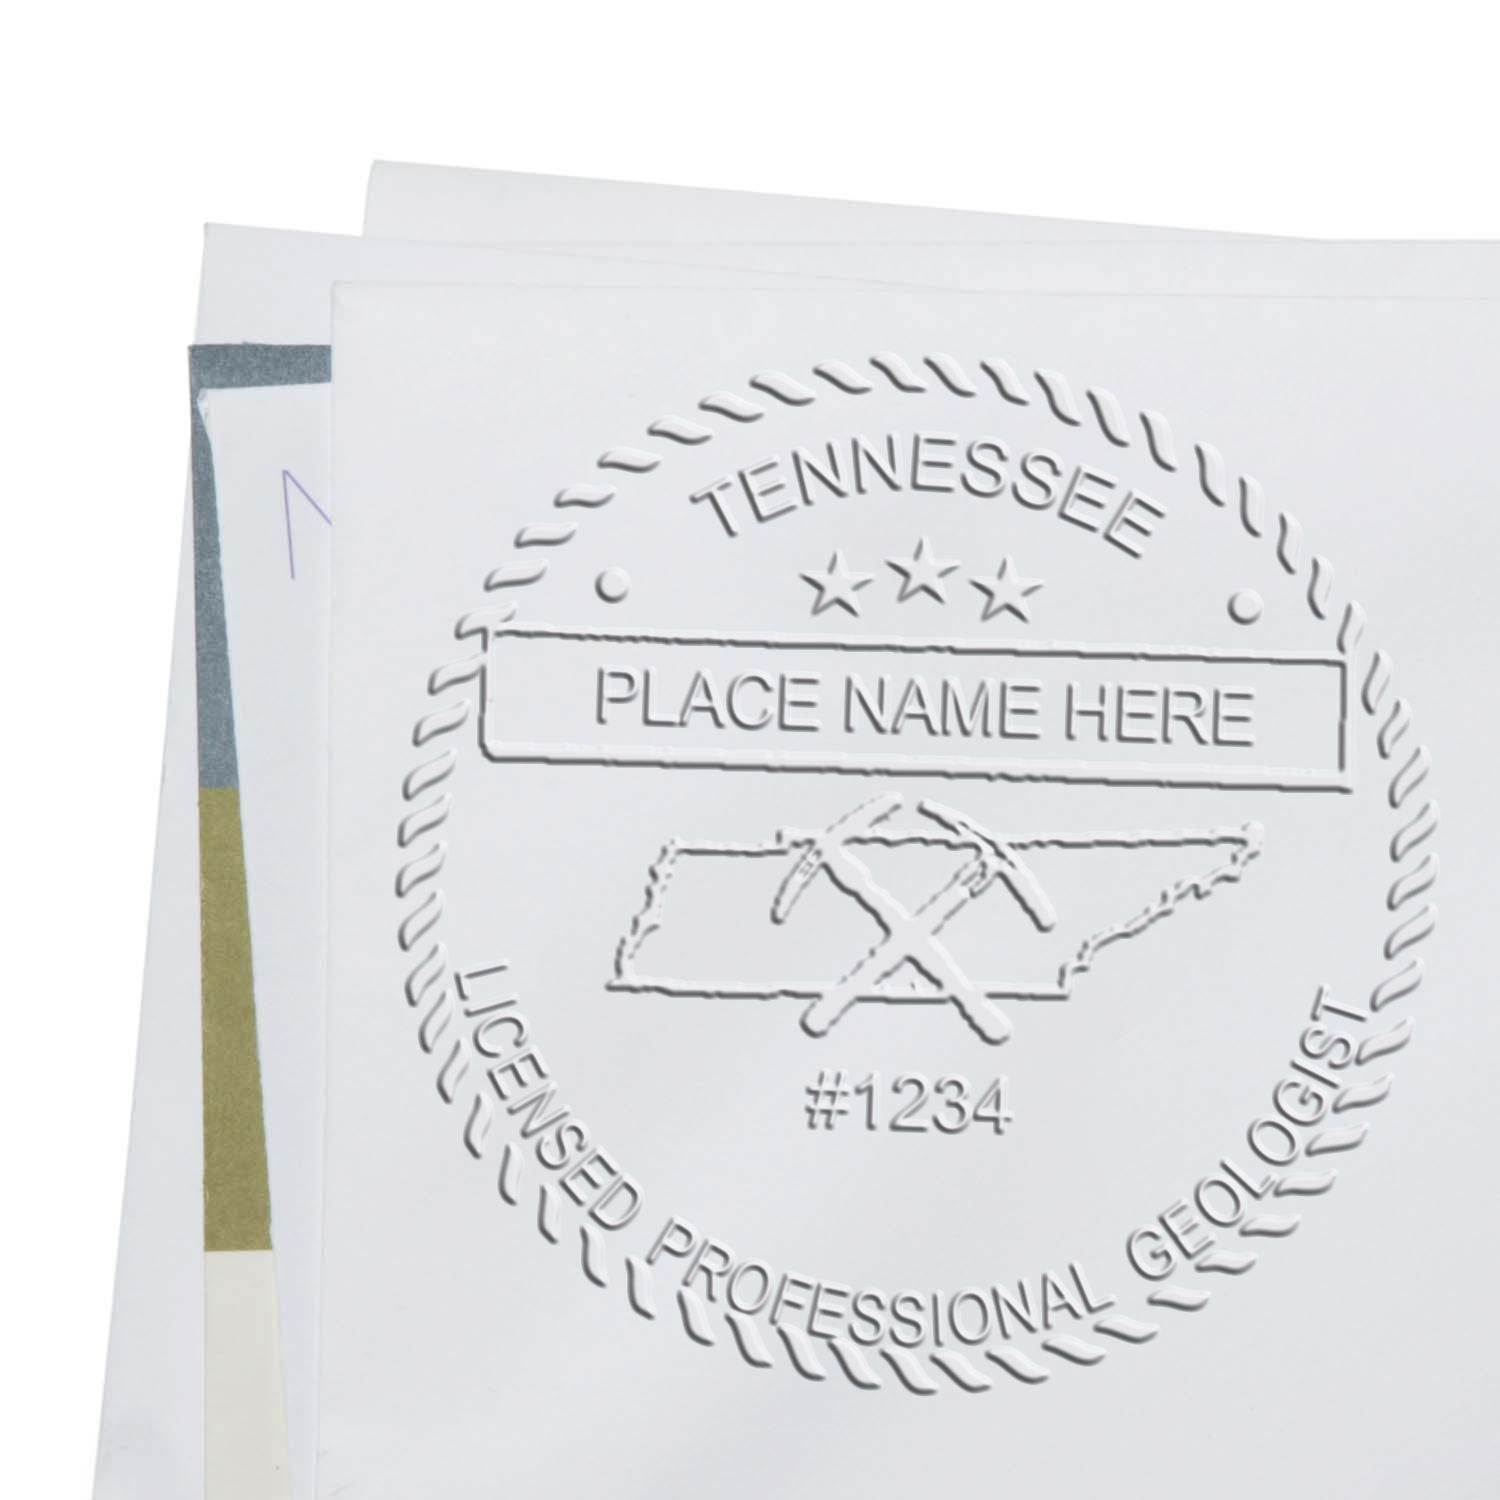 This paper is stamped with a sample imprint of the Long Reach Tennessee Geology Seal, signifying its quality and reliability.